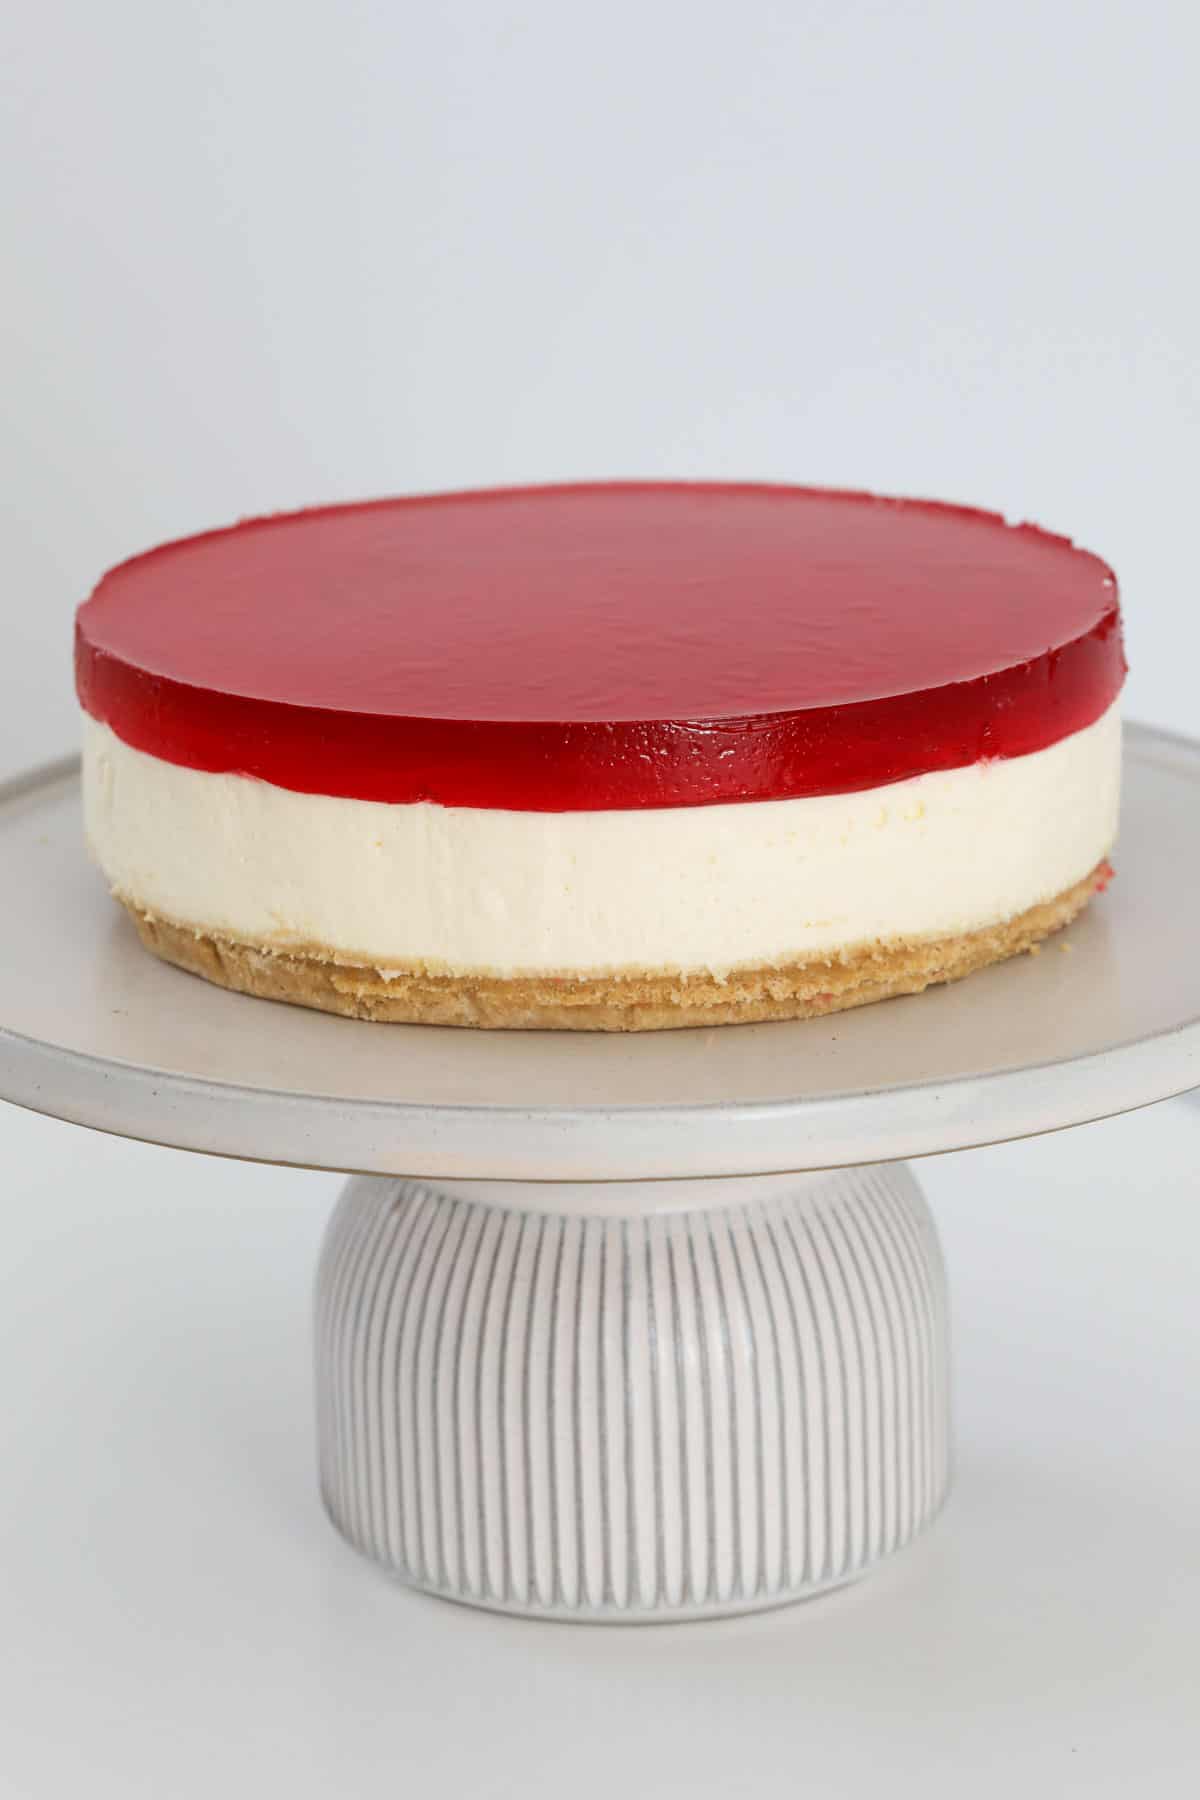 A chilled jelly cheesecake on a cake stand.